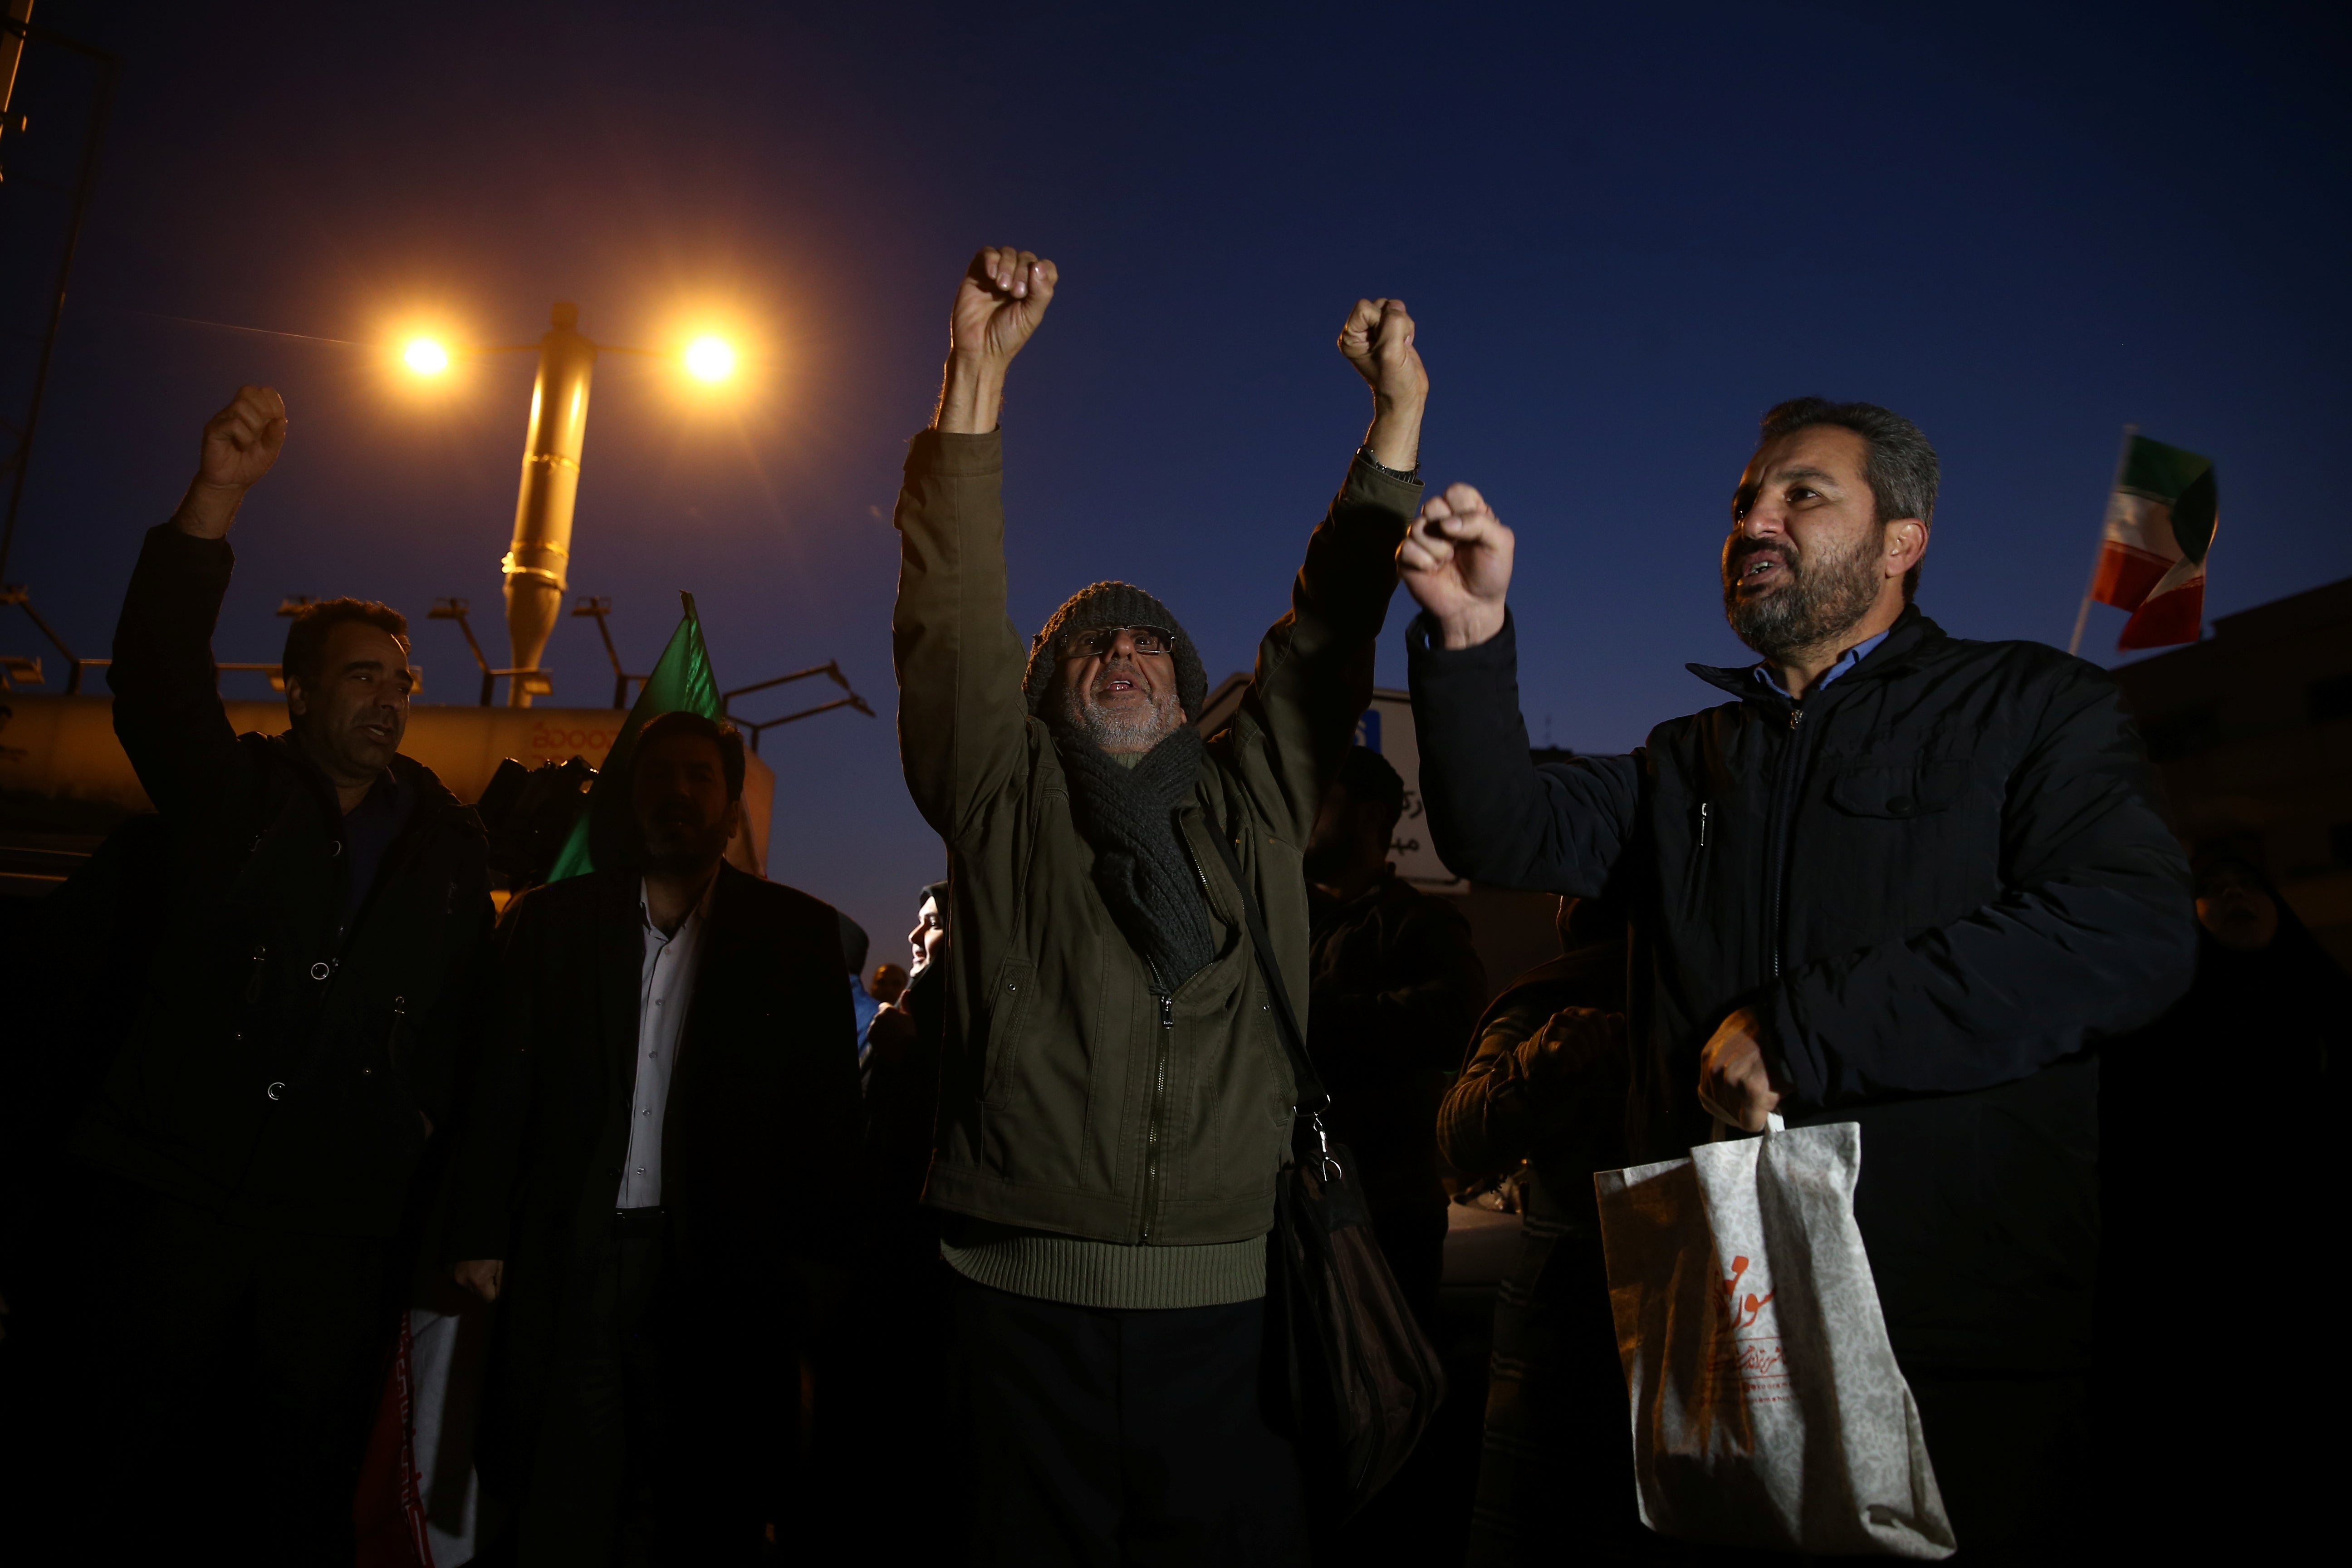 A group of men raise their fists and cheer. An Iranian flag flies in the background.